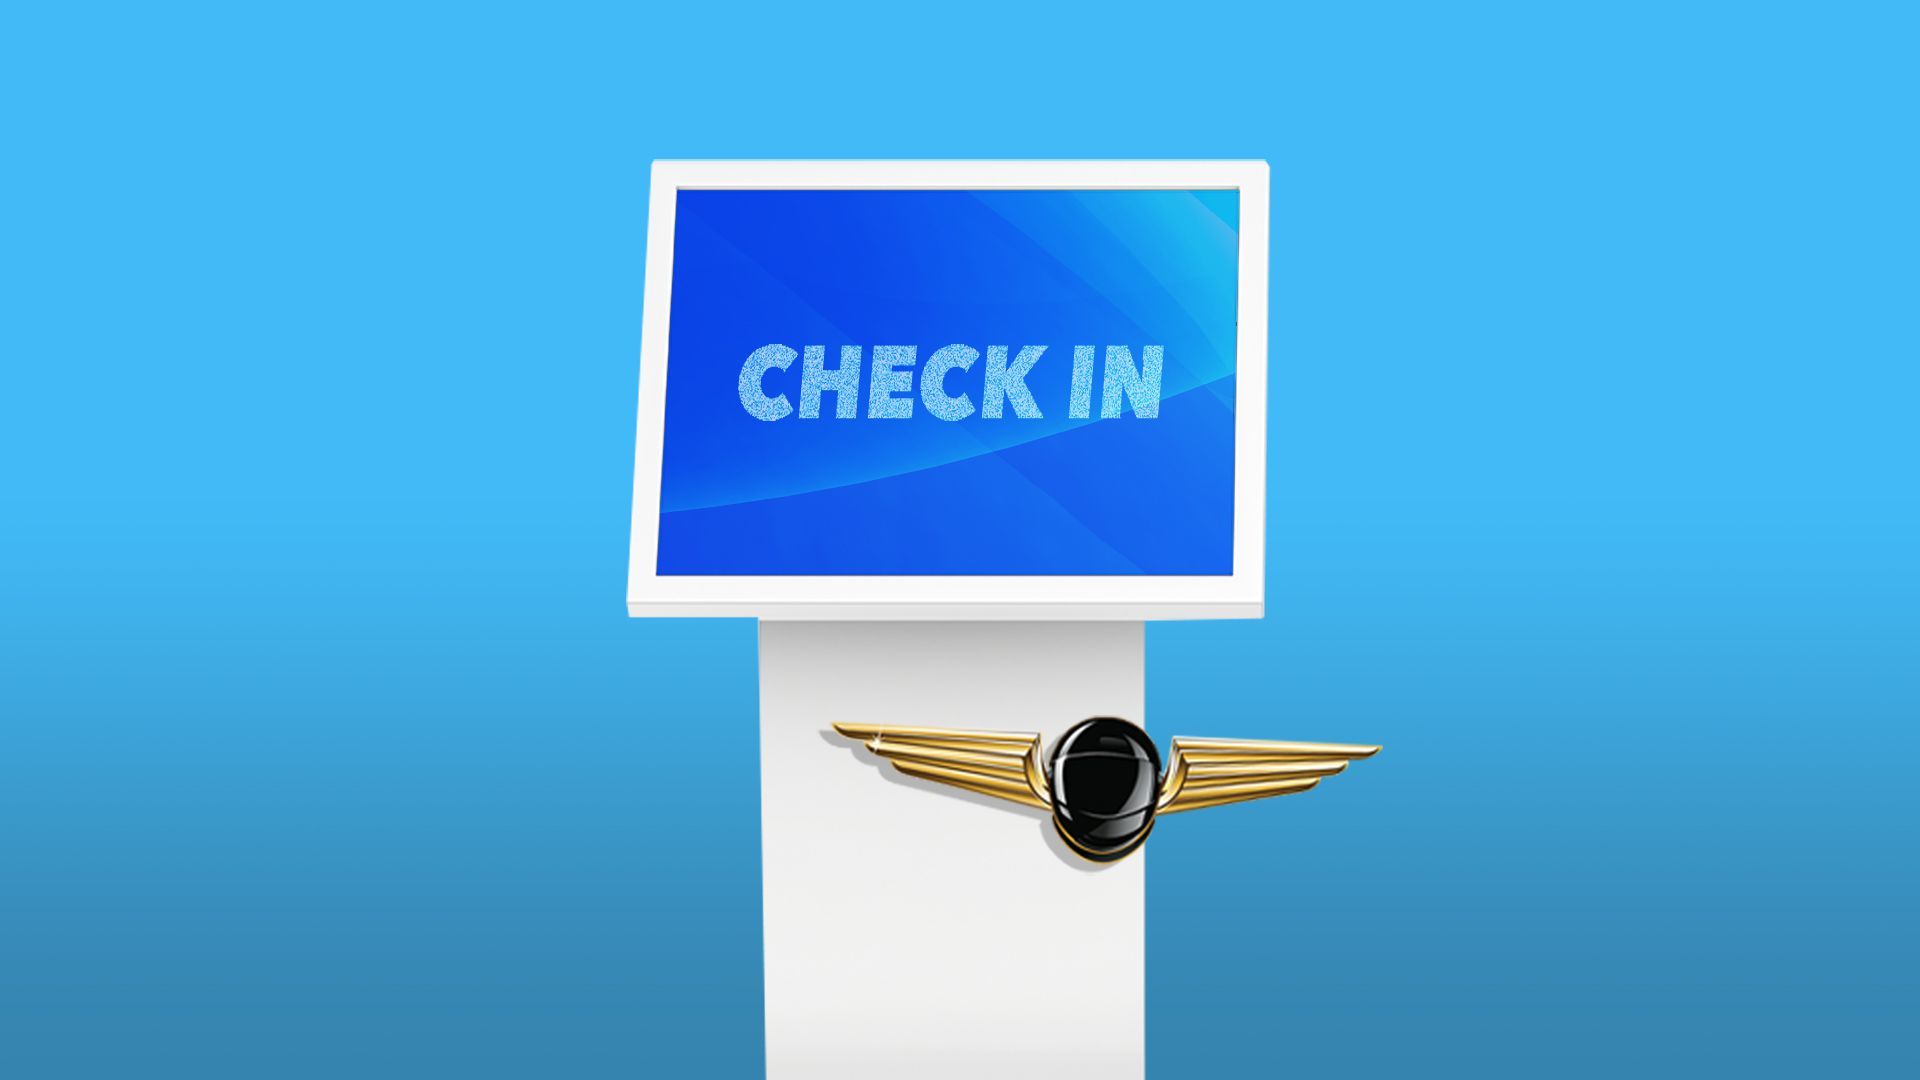 Illustration of an airline check-in kiosk with a wings pin